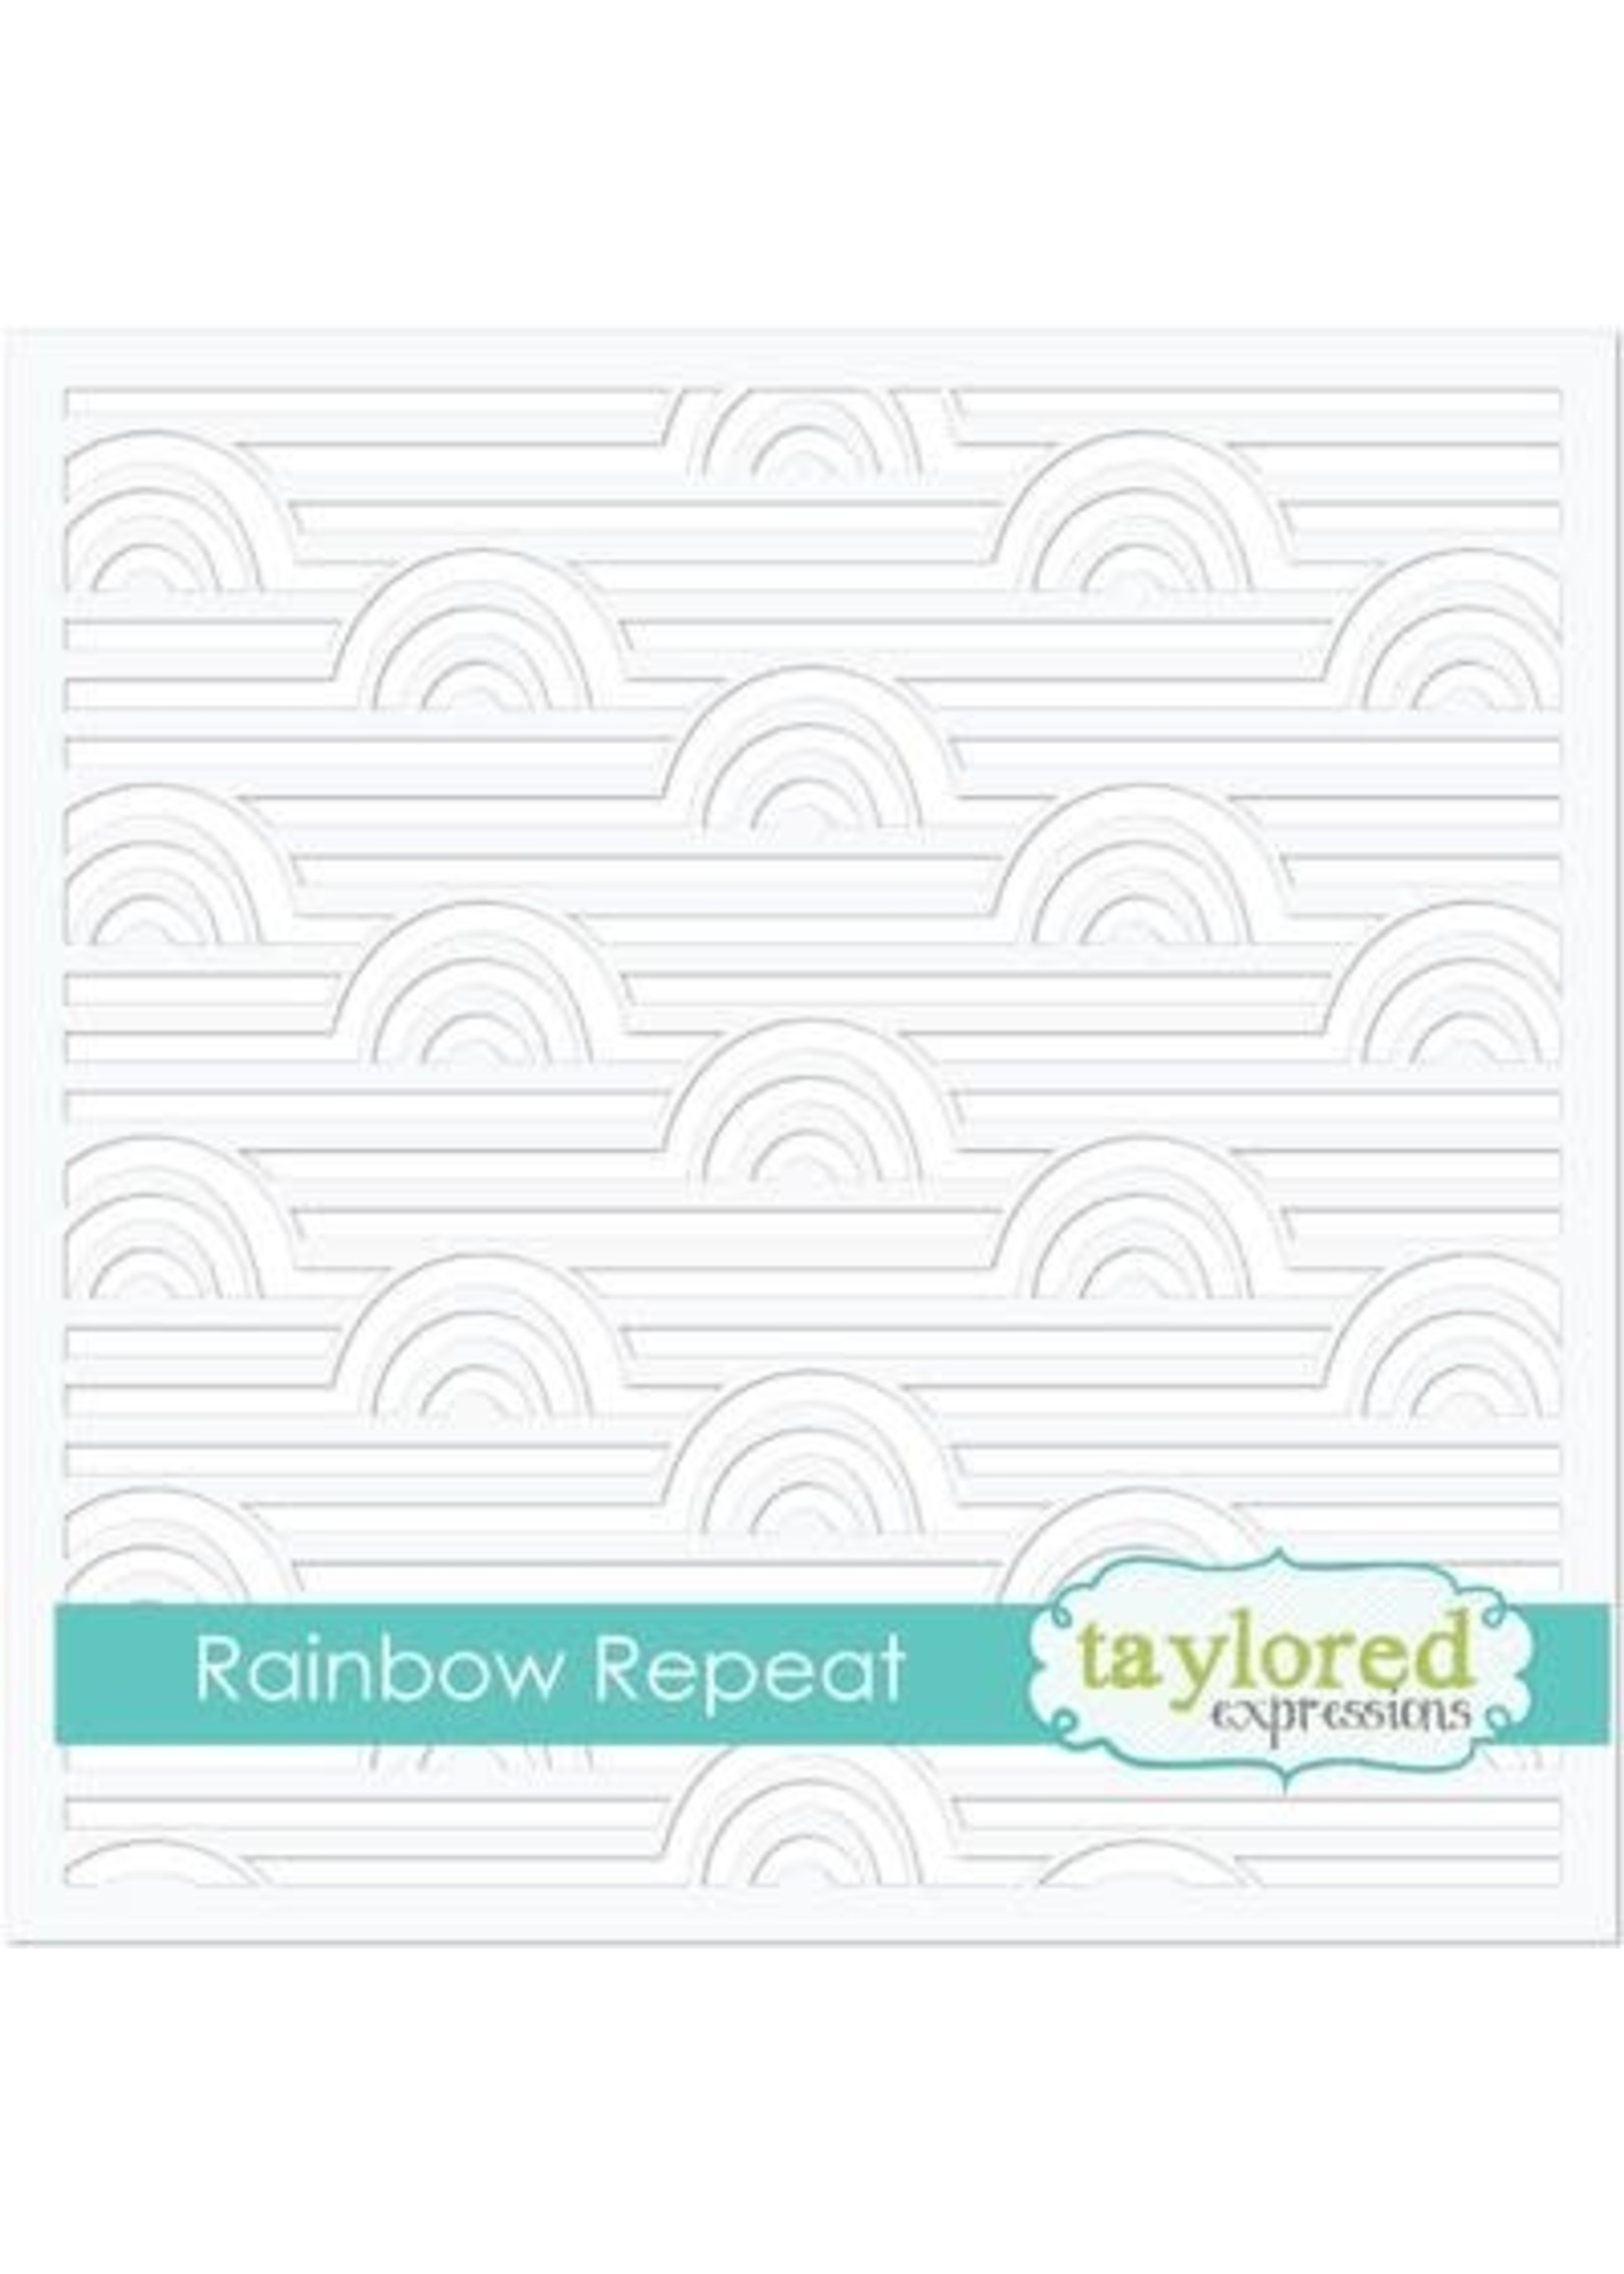 TAYLORED EXPRESSIONS RAINBOW REPEAT STENCIL